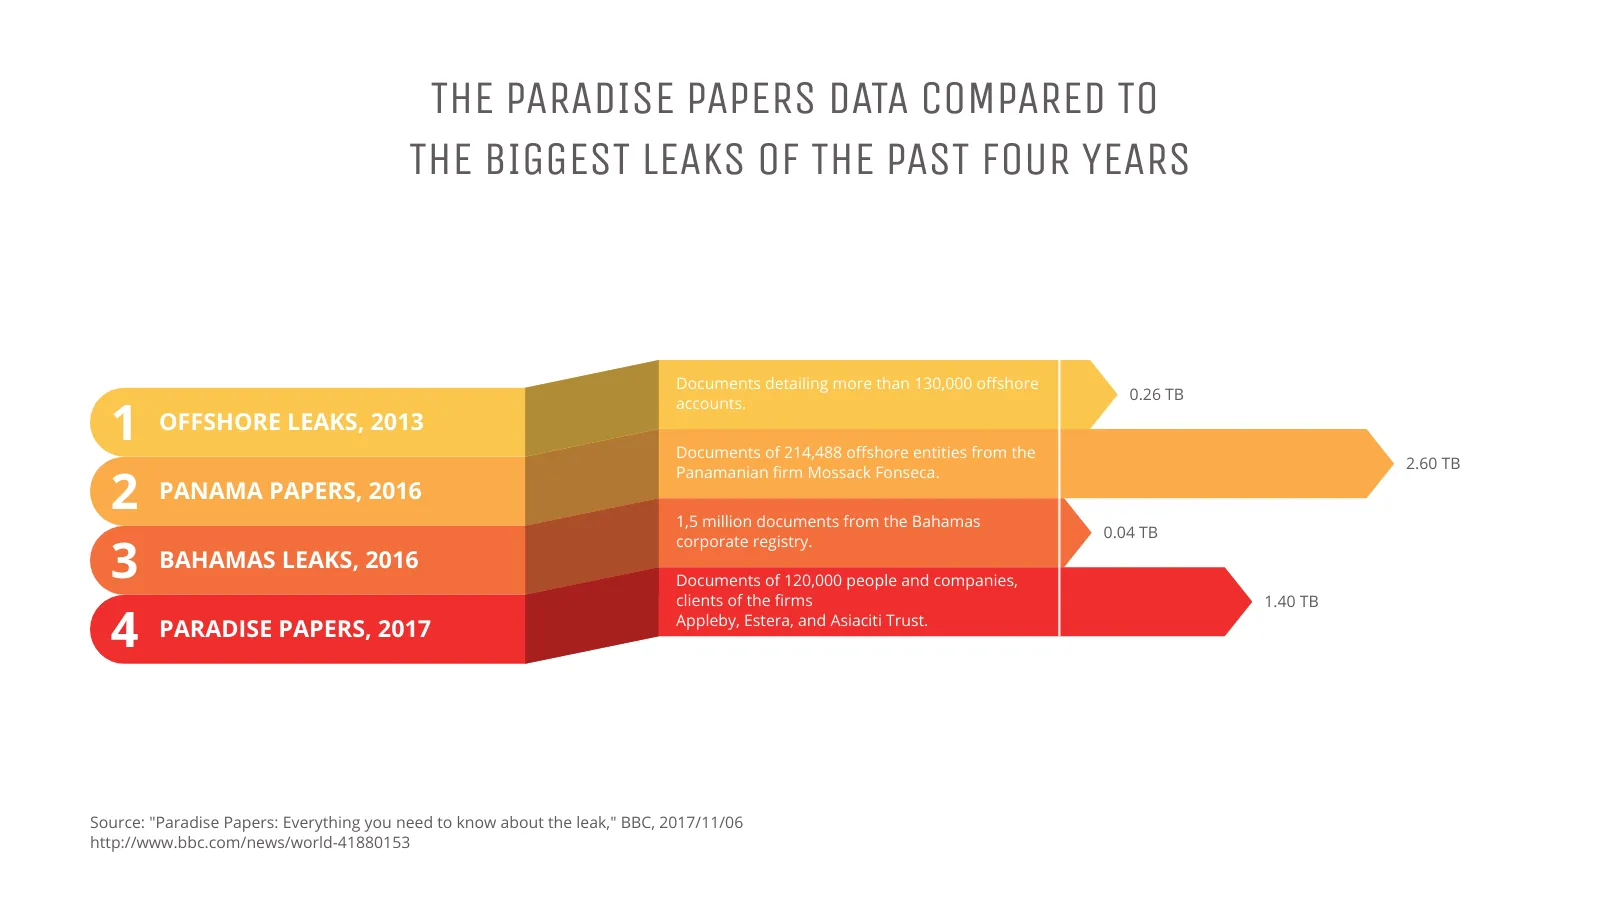 Ribbon Bar Chart example: THE PARADISE PAPERS DATA COMPARED TO 
THE BIGGEST LEAKS OF THE PAST FOUR YEARS